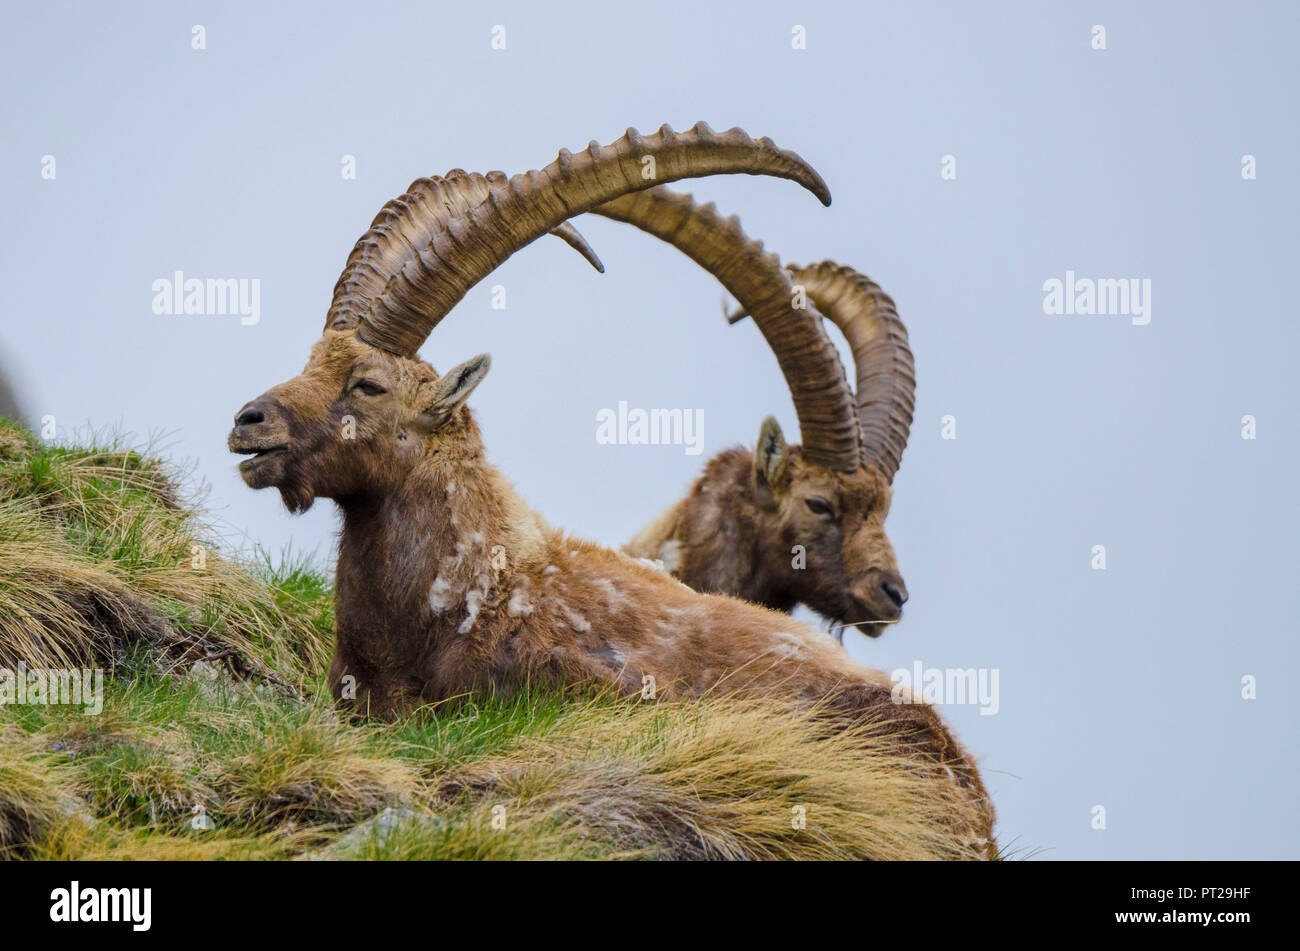 Two alpine ibex in springtime, Valle dell'Orco, Gran Paradiso National Park, Piedmont, Graian alps, Province of Turin, Italian alps, Italy Stock Photo